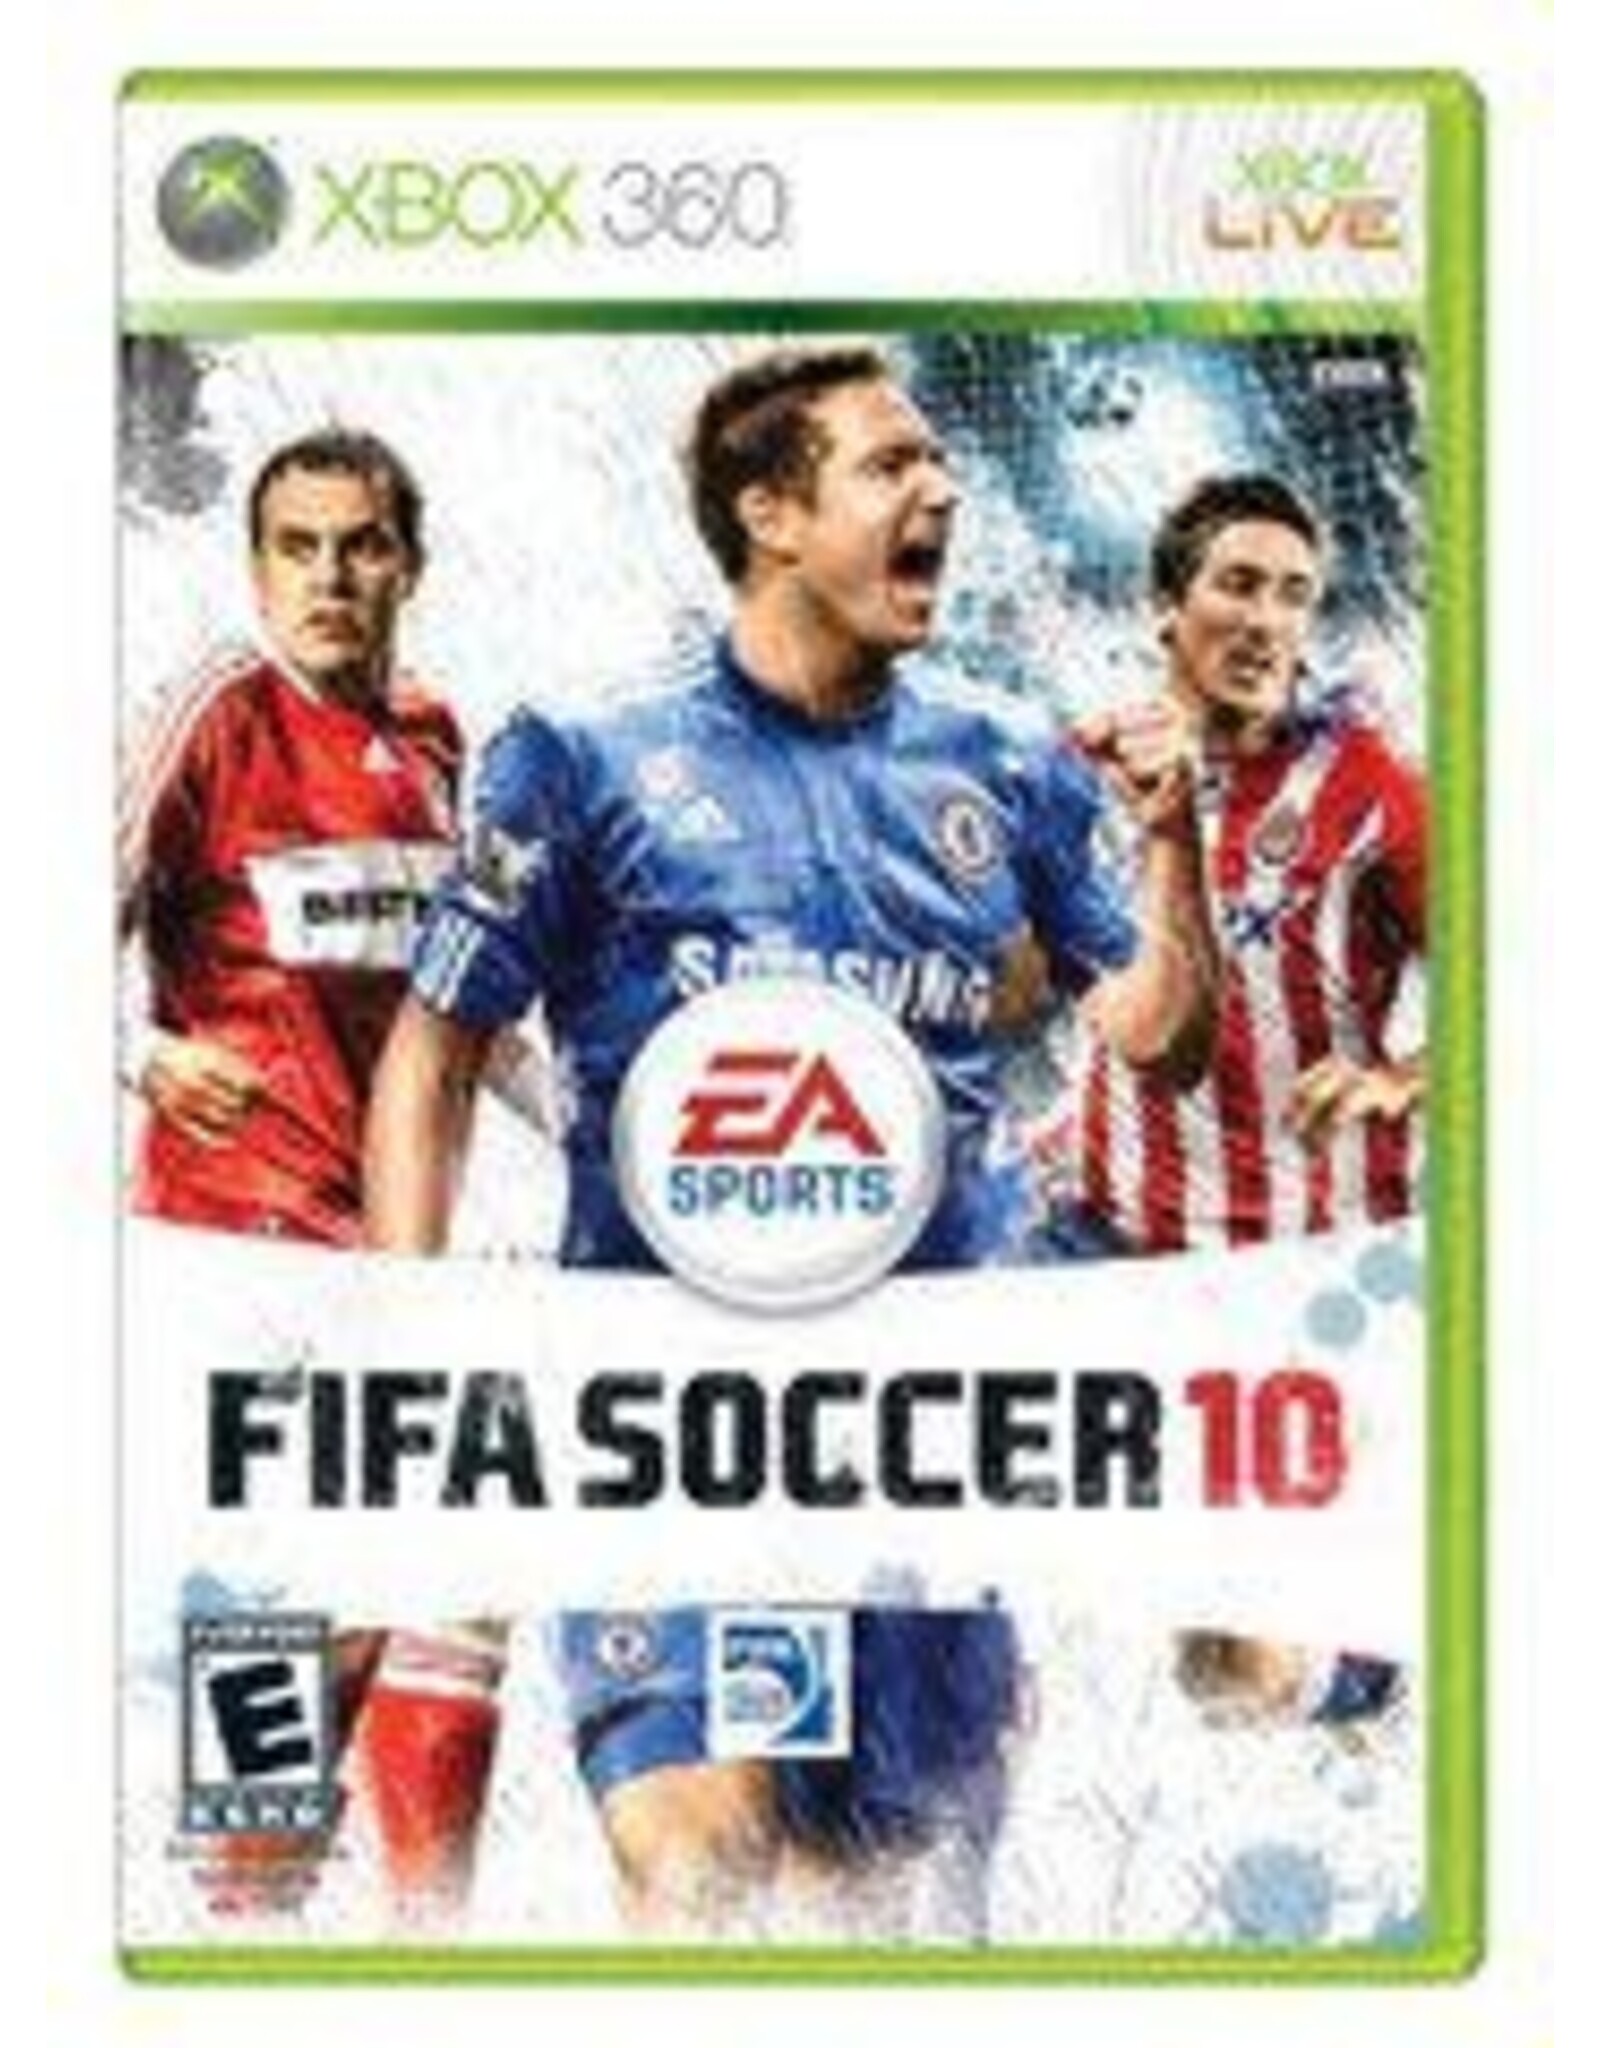 Xbox 360 FIFA Soccer 10 (Used, Cosmetic Damage)